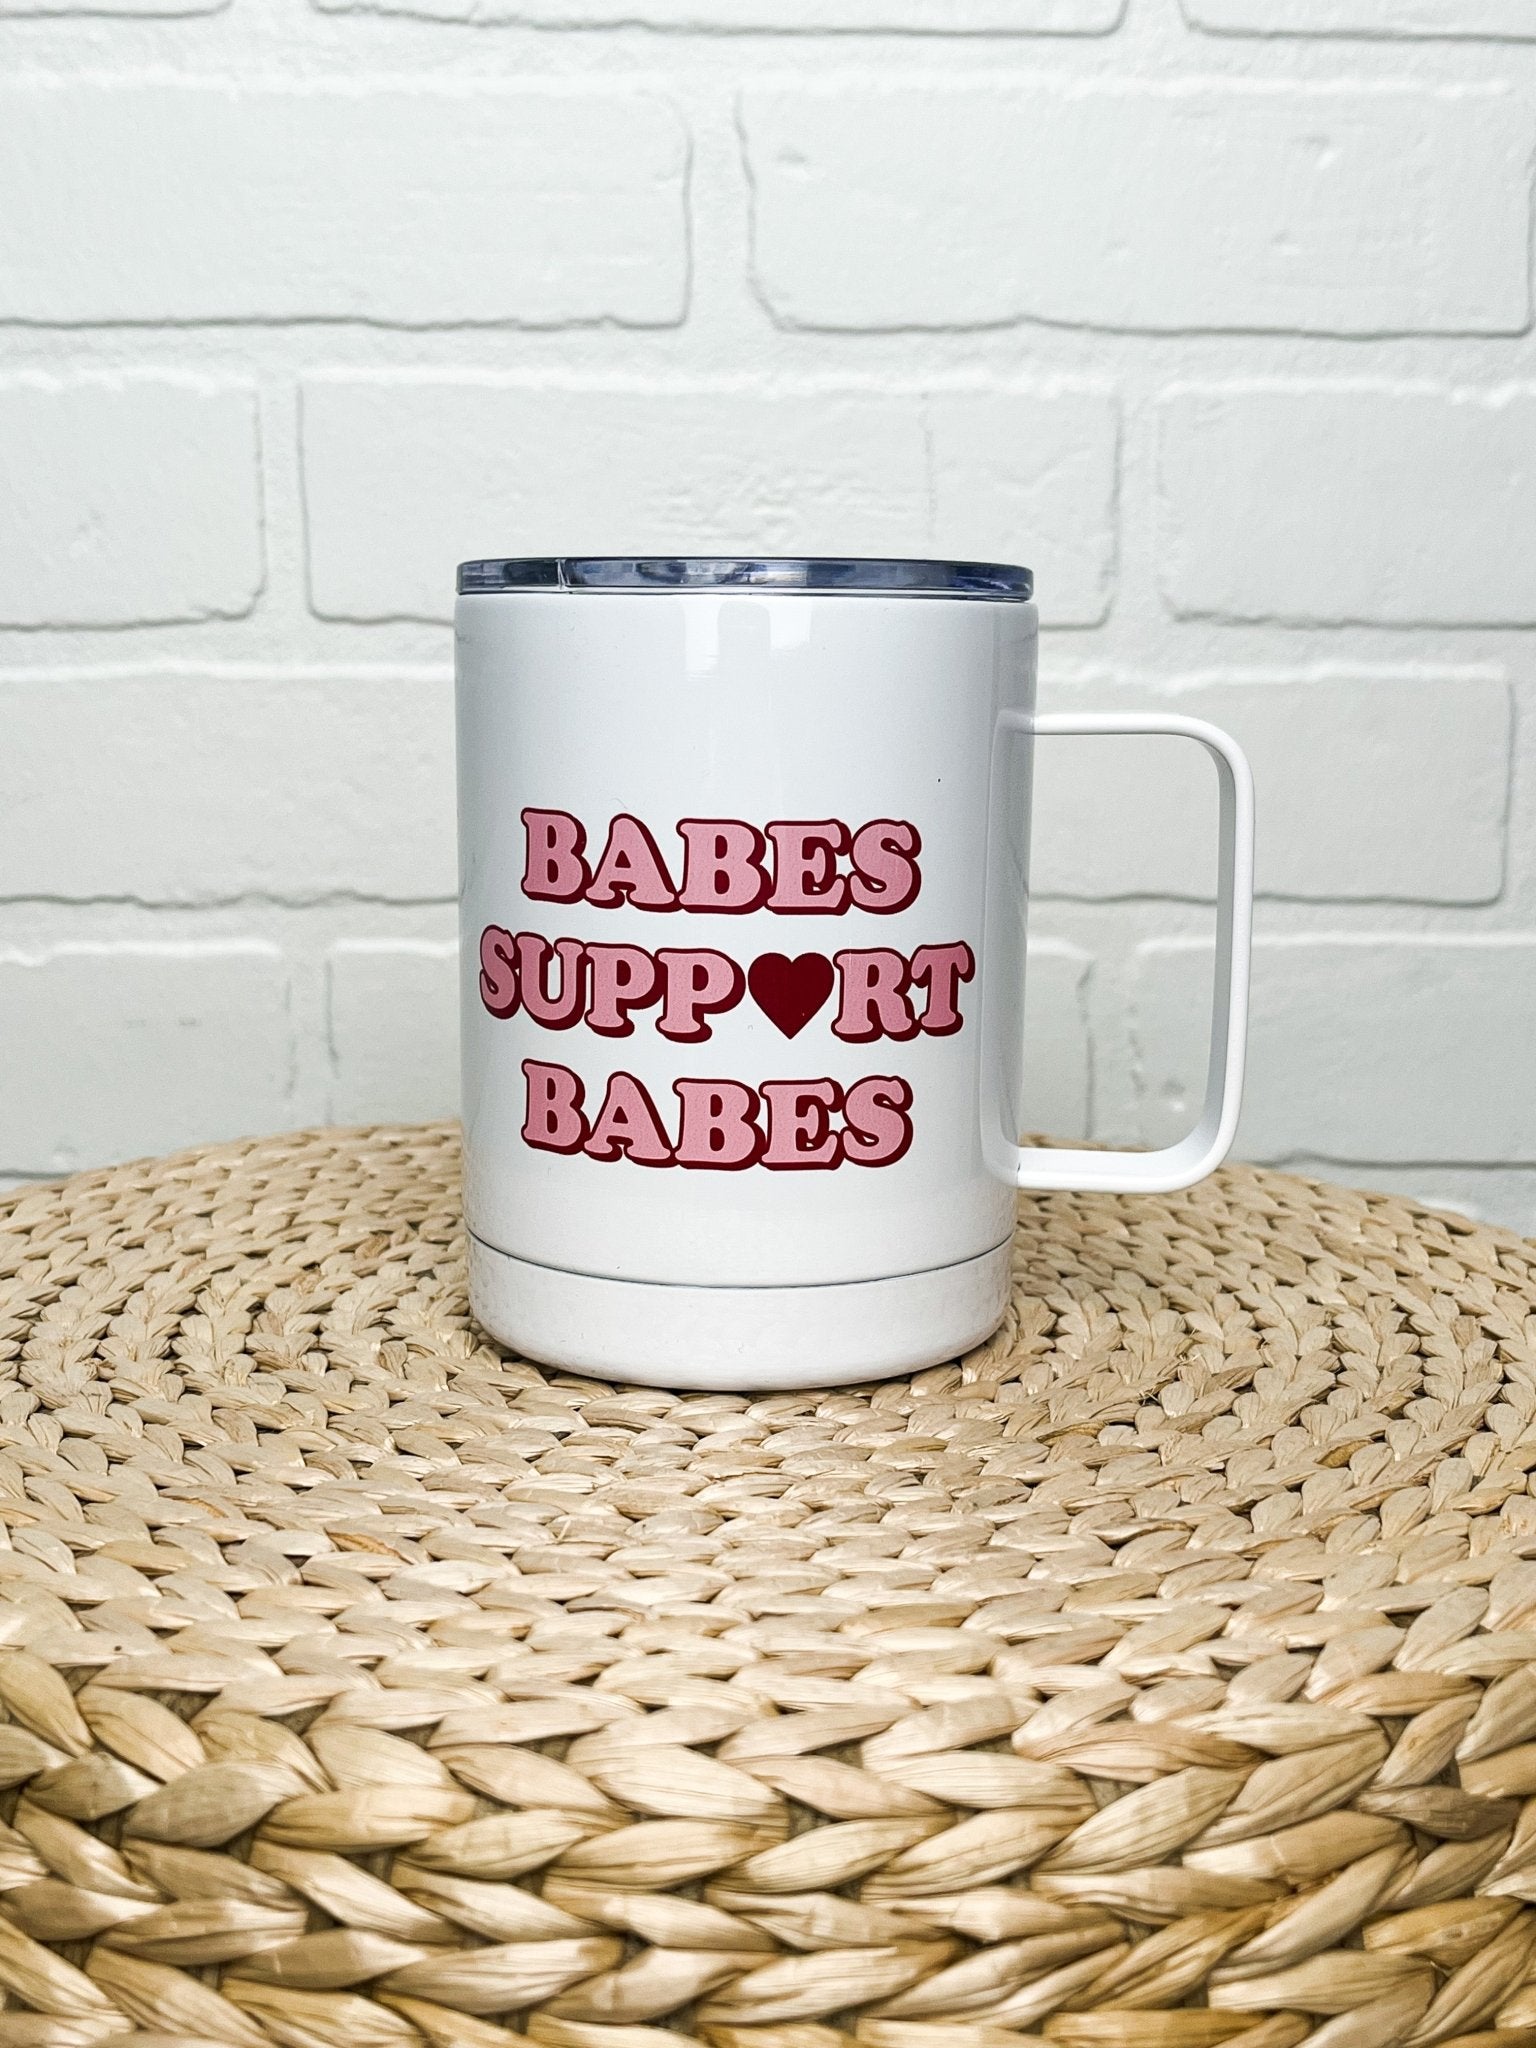 Mugsby Babes support babes travel cup - Trendy Tumblers, Mugs and Cups at Lush Fashion Lounge Boutique in Oklahoma City